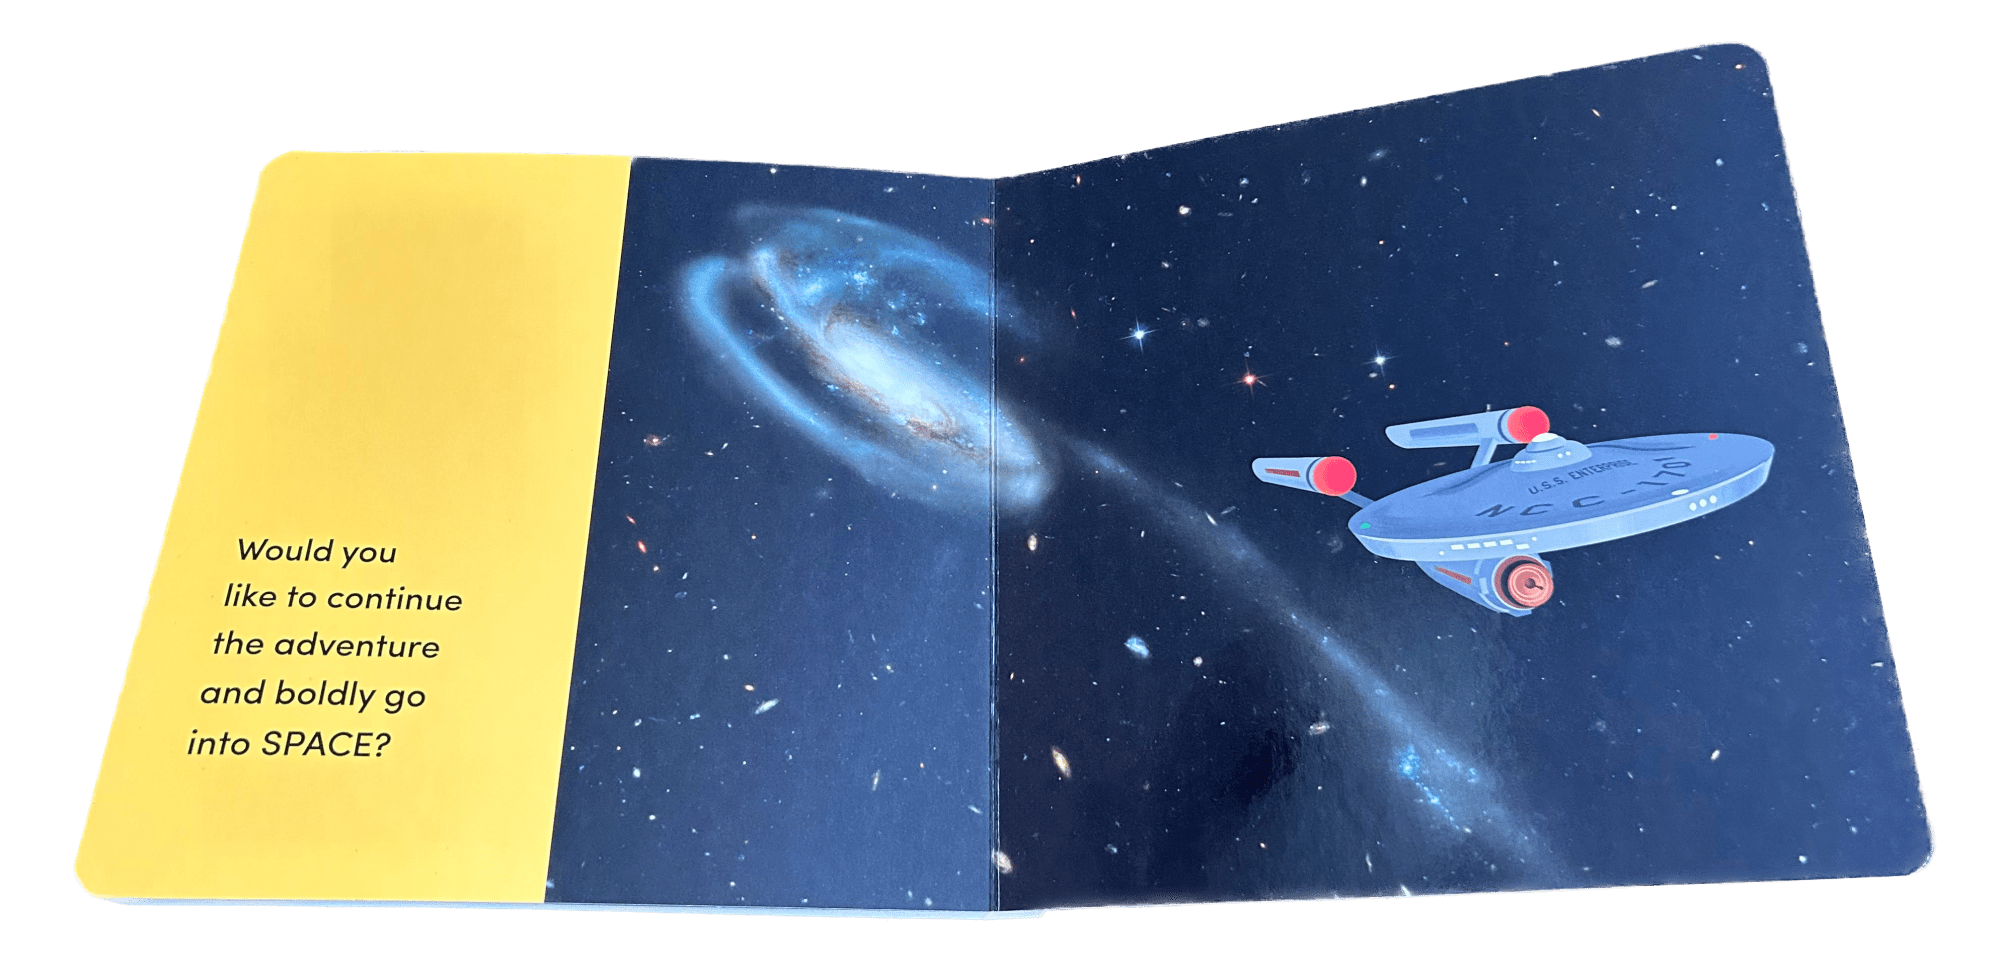 A child's board book shows Hubble's image of the Tadpole Galaxy with a cartoon image of Star Trek's Enterprise flying away from them. On the right the text reads: "Would you like to continue the adventure and boldly go into SPACE?"